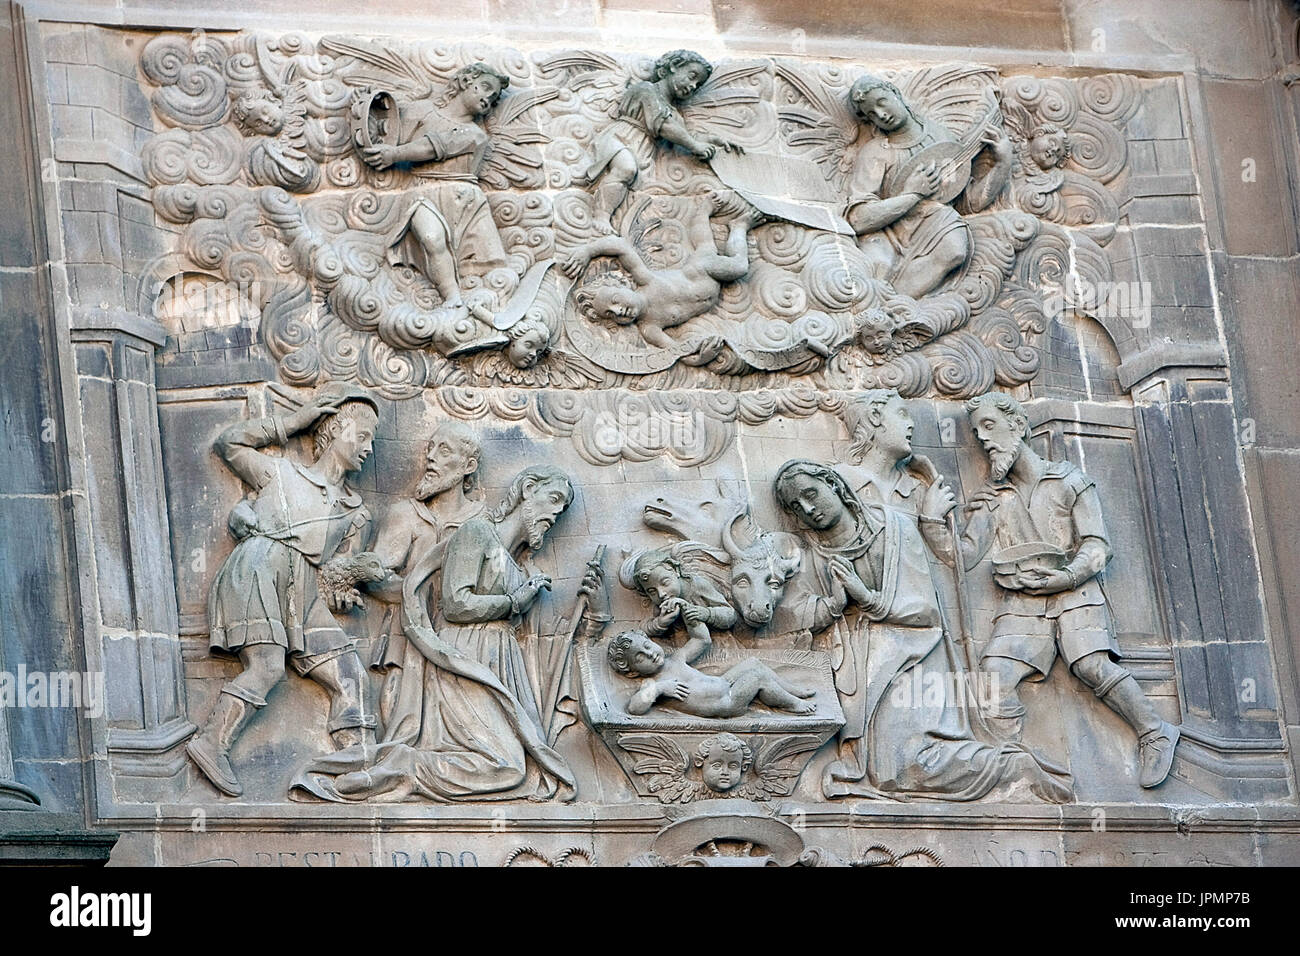 Relief of the adoration of the shepherds, relief of the Front of the chapel of El Salvador of Ubeda, Jaen province, Spain Stock Photo